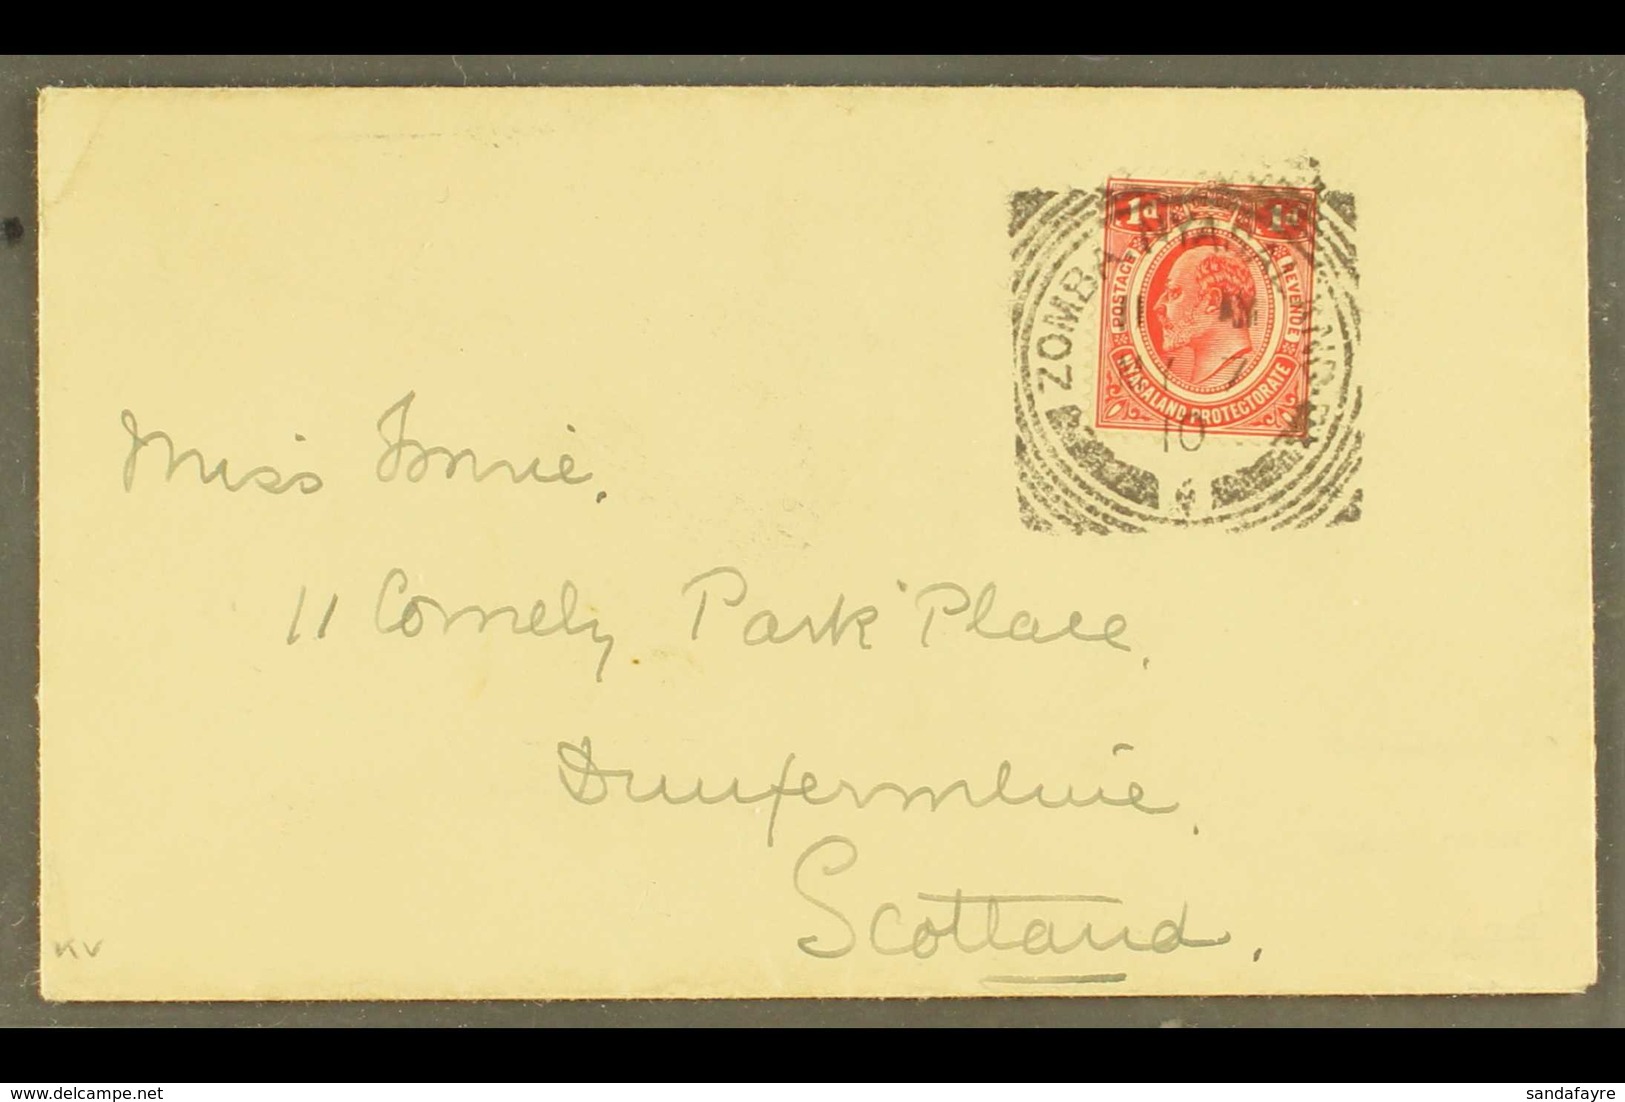 1910 Fine Cover Addressed To Scotland, Franked KEVII 1d With Superb Strike Of "Zomba" Squared Circle, Fine Strikes Of "C - Nyassaland (1907-1953)